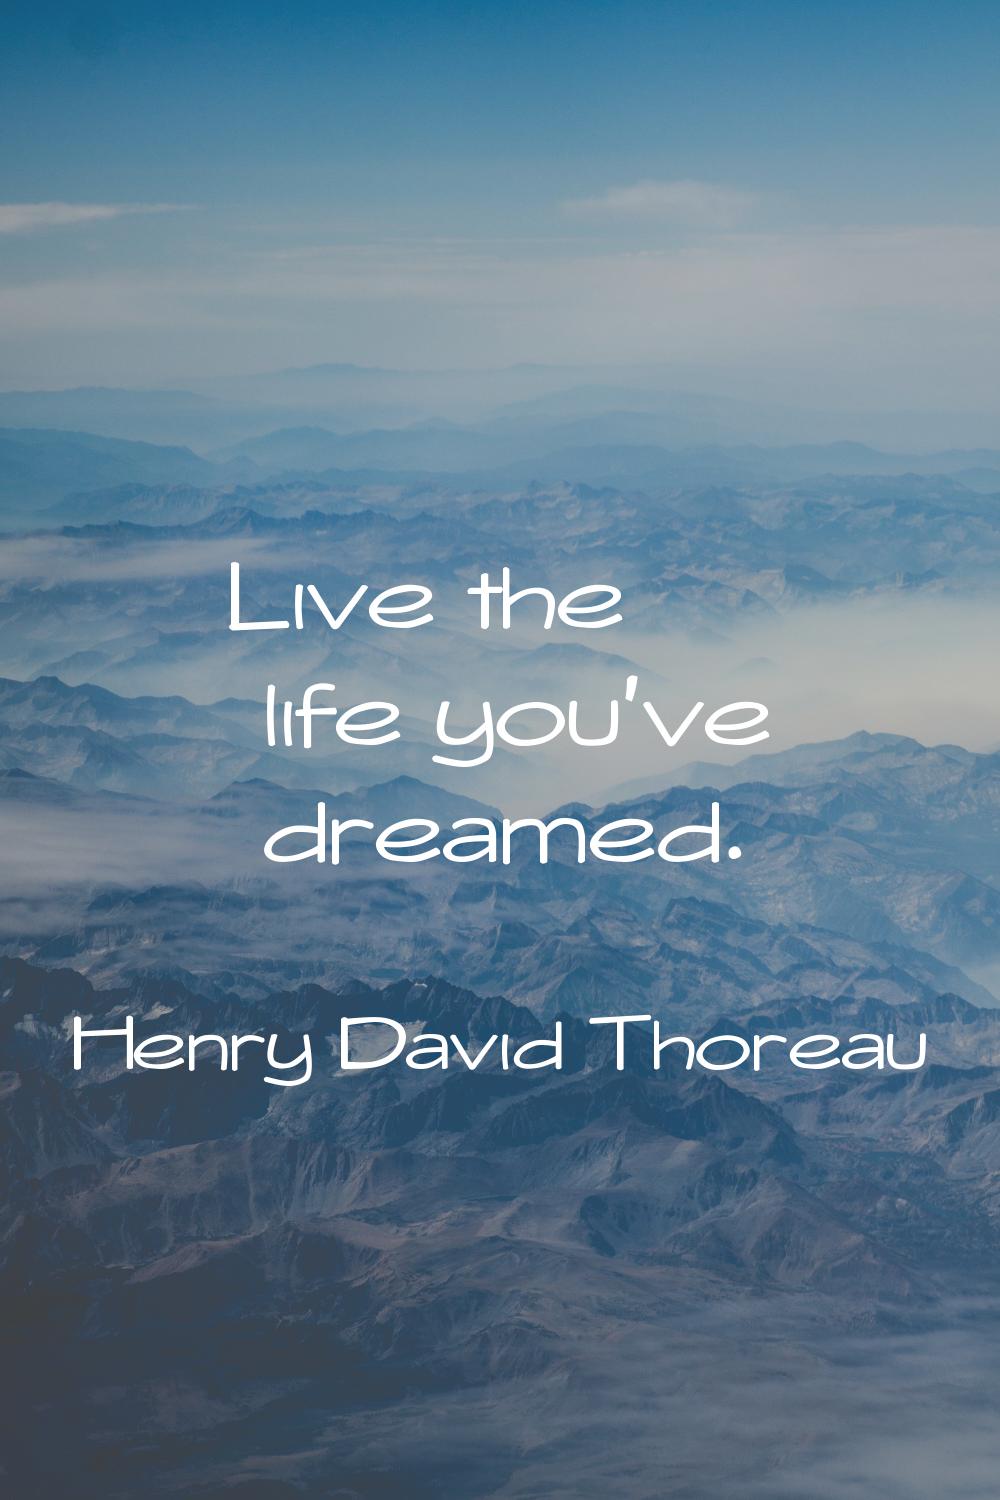 Live the life you've dreamed.